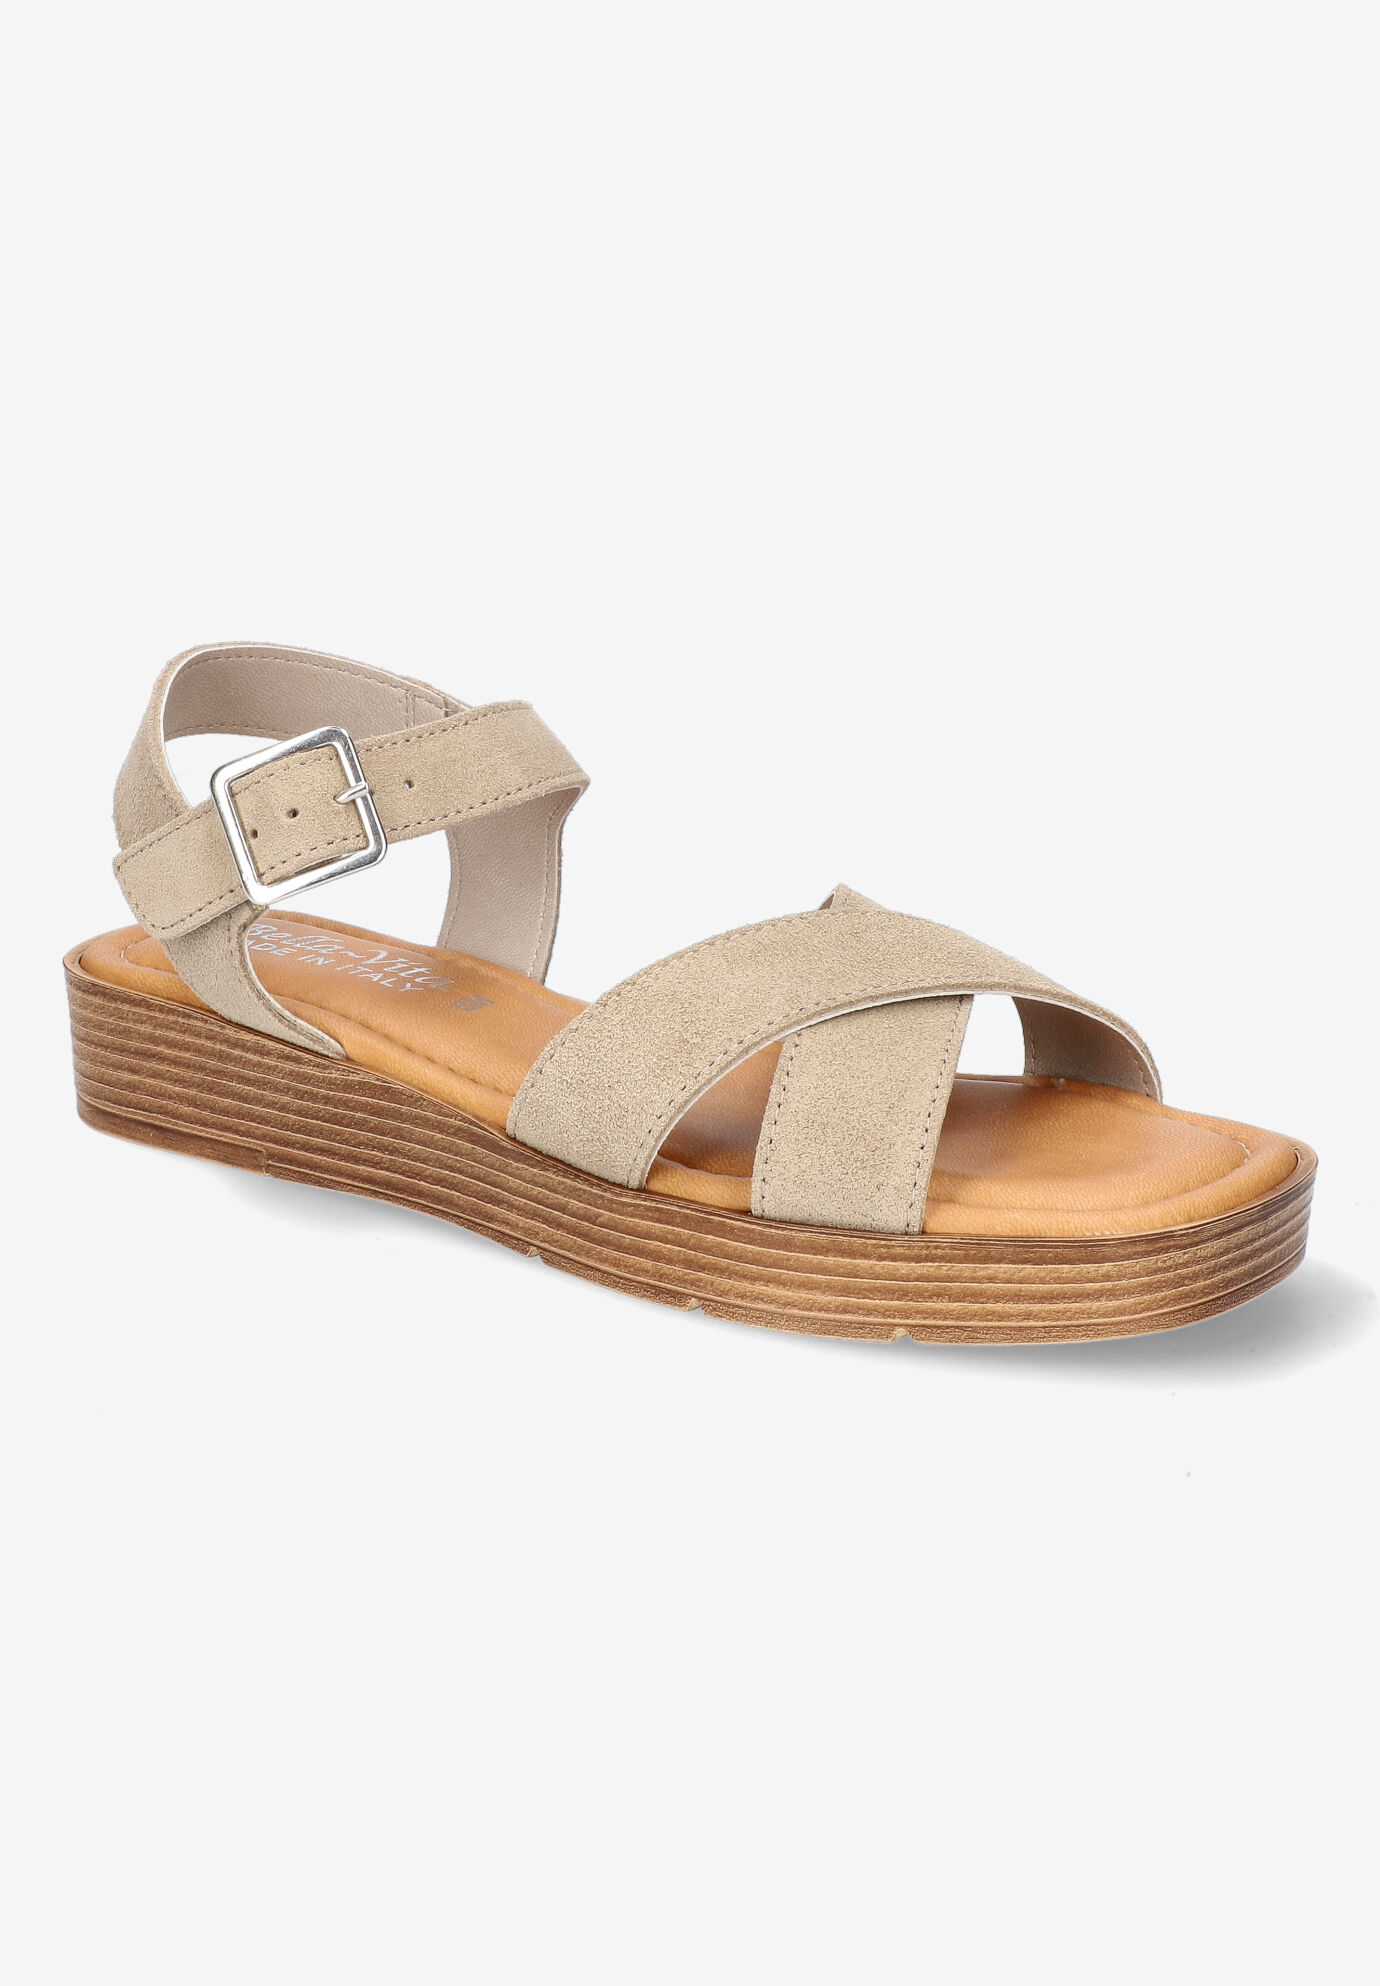 Extra Wide Width Women's Car-Italy Sandal by Bella Vita in Stone Suede Leather (Size 8 1/2 WW)